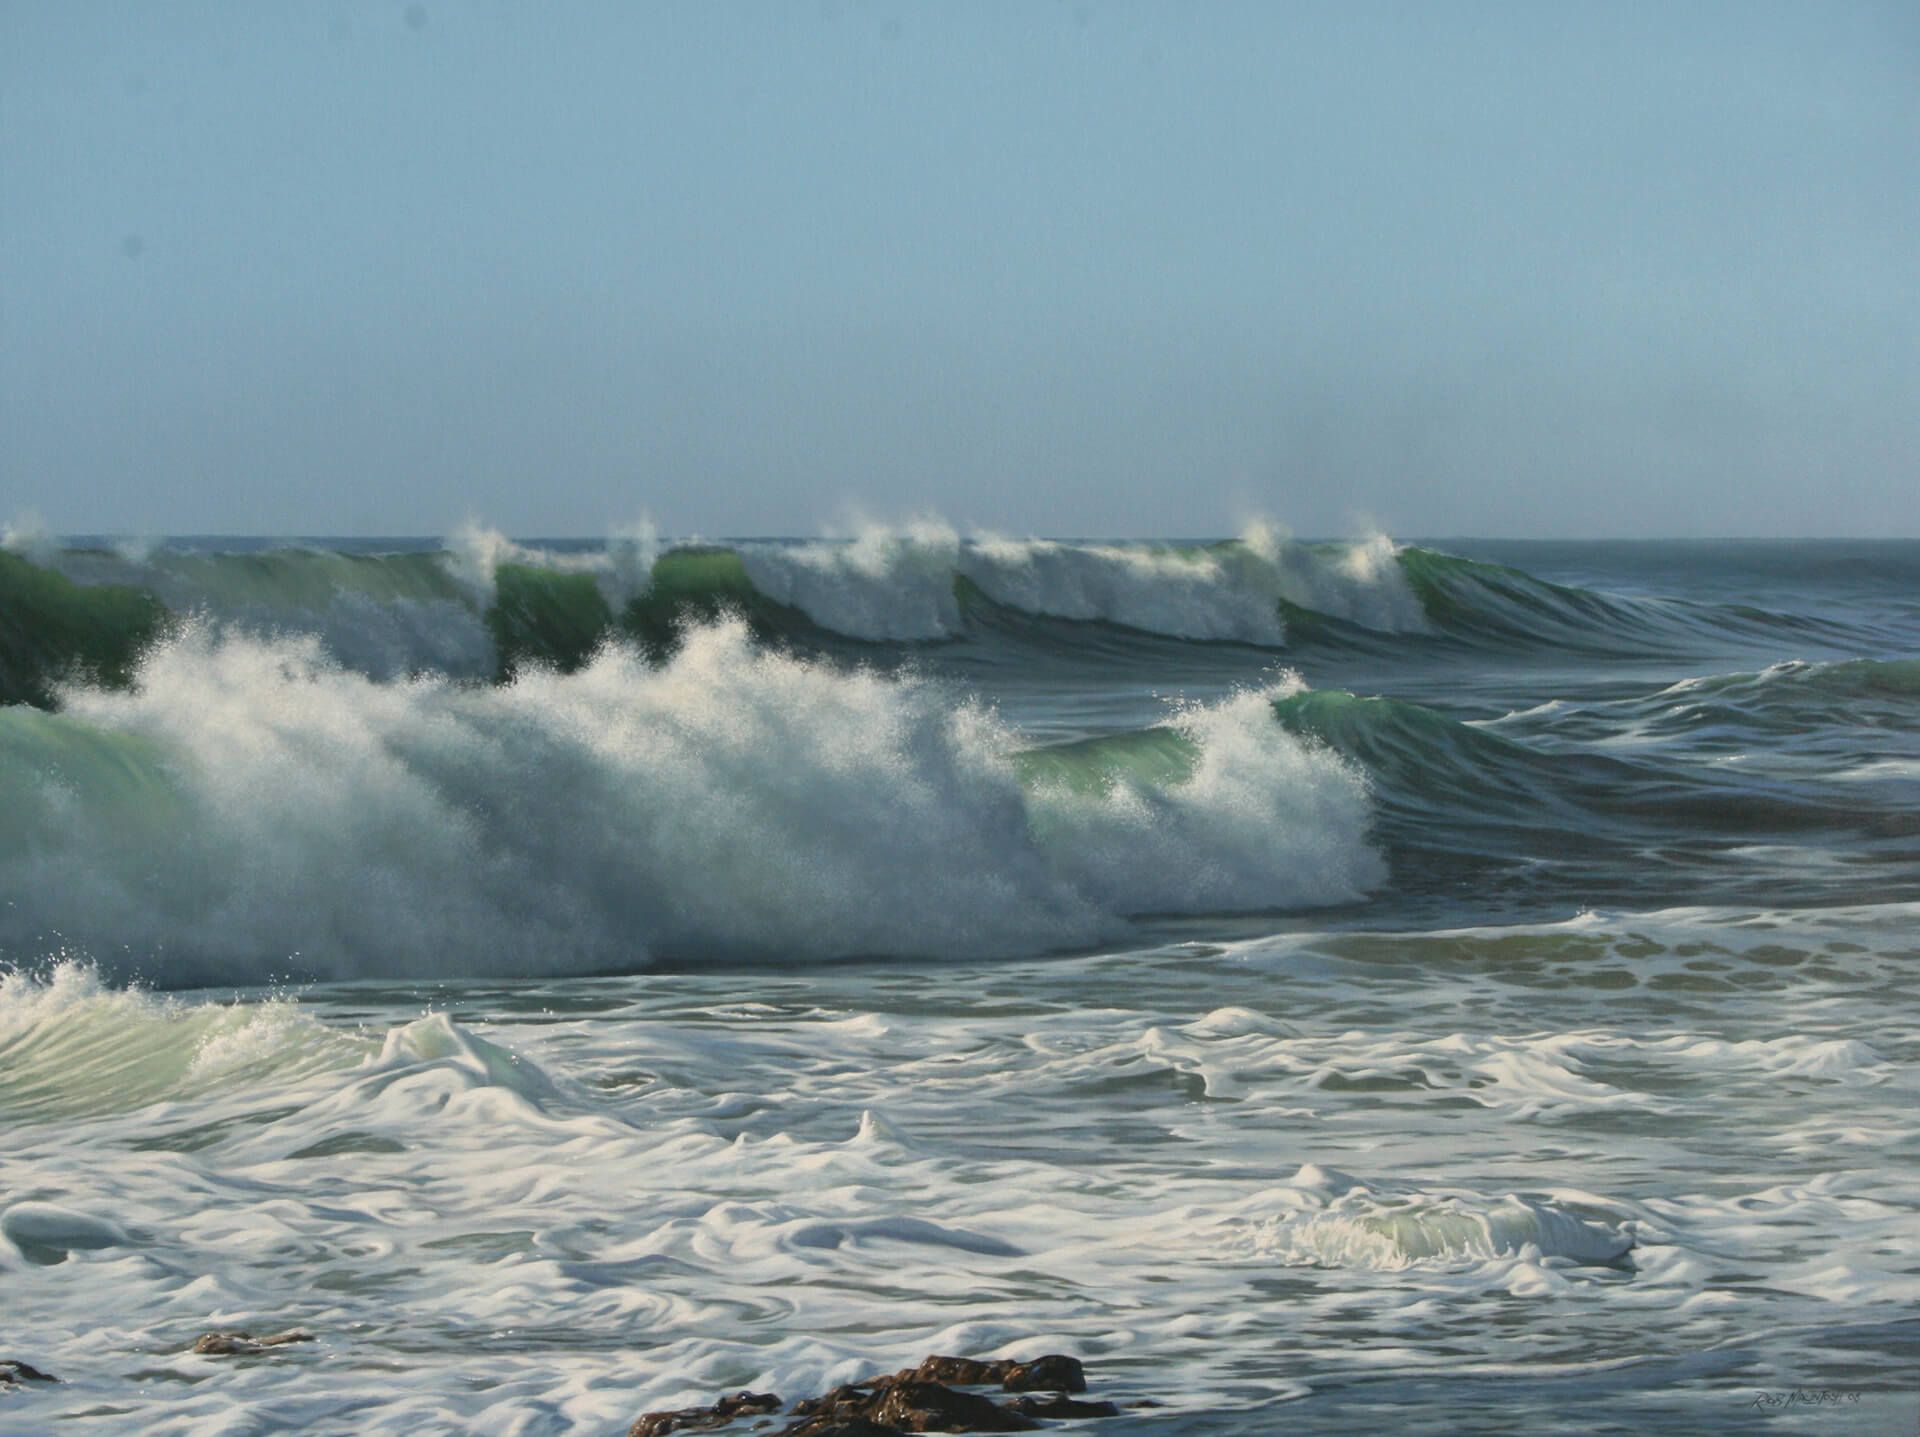 Photorealistic painting of large waves crashing in to each other